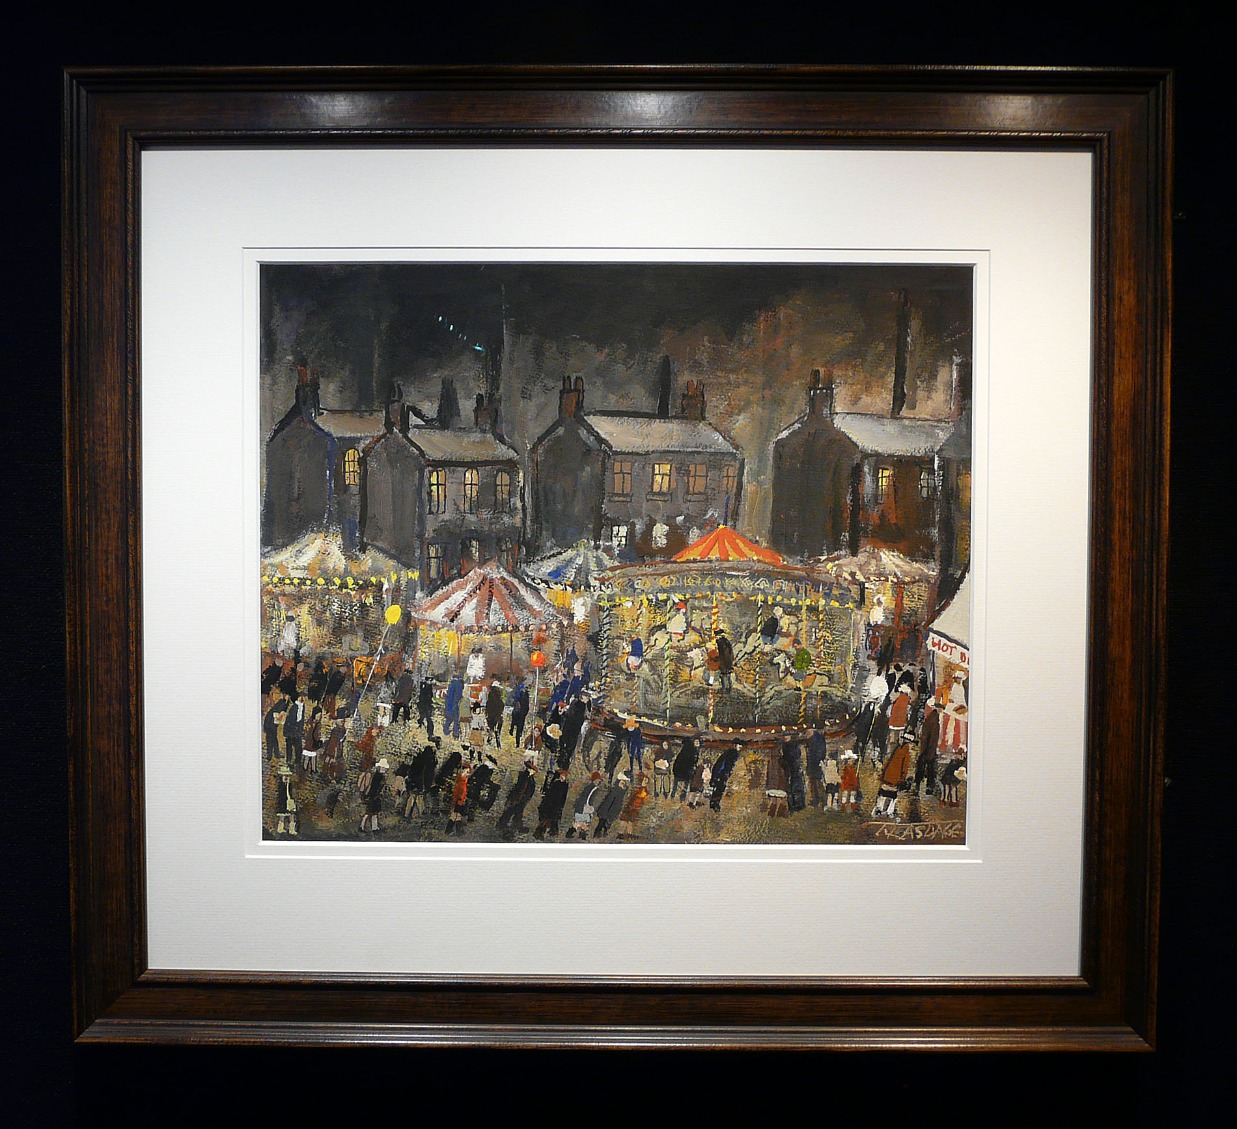 Merry-go-Rounds by Malcolm Teasdale